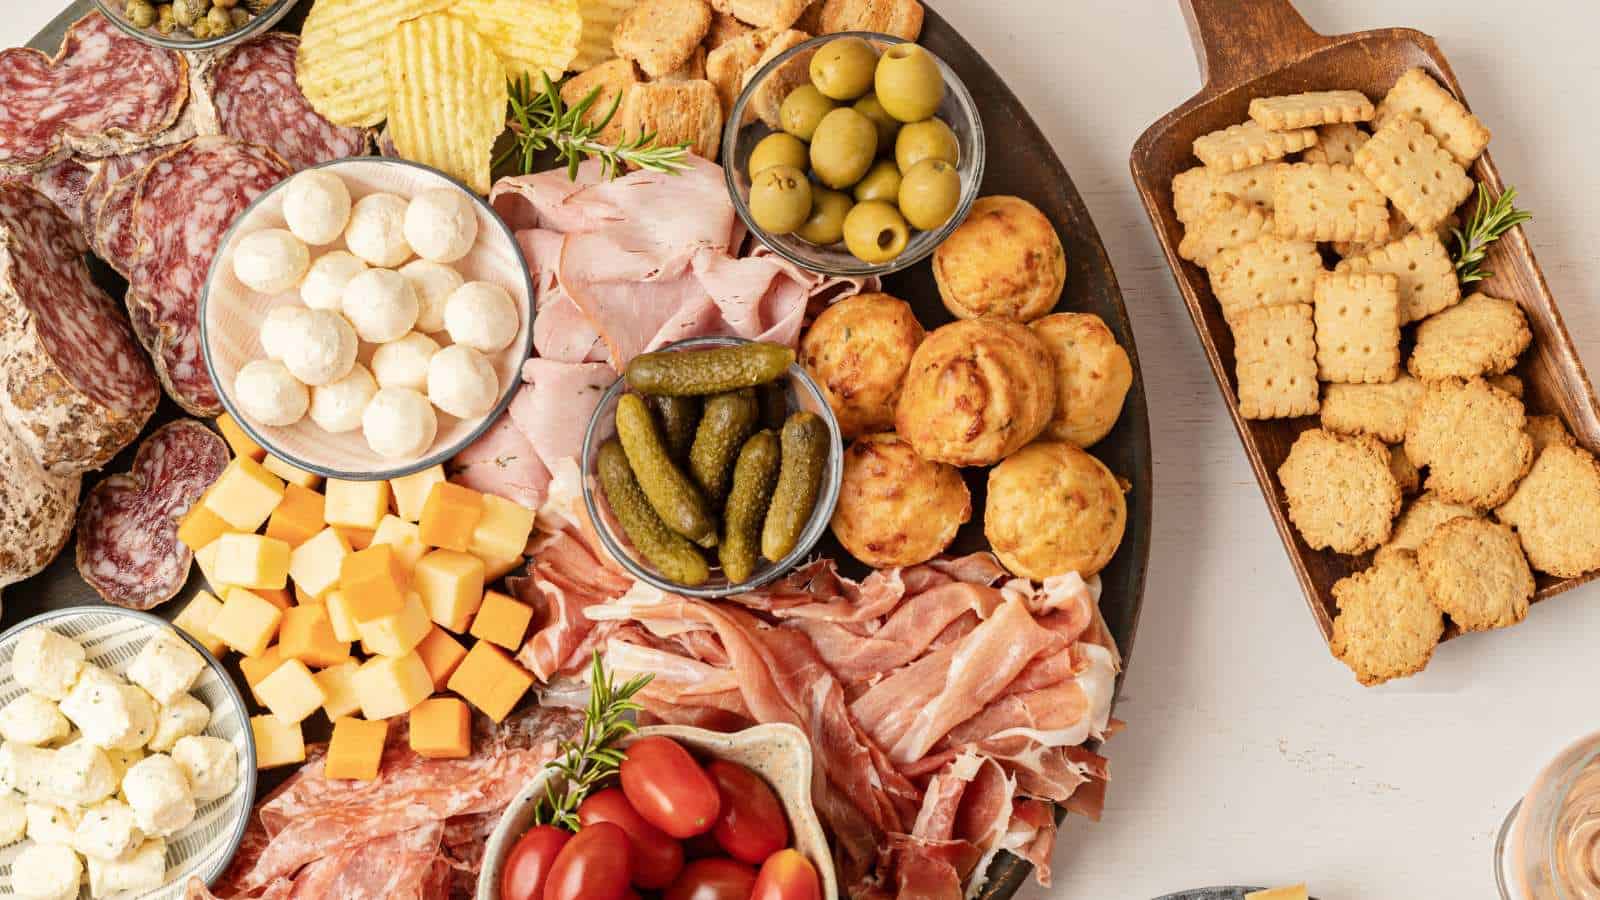 A holiday charcuterie board of meats, cheeses, and crackers on a table.